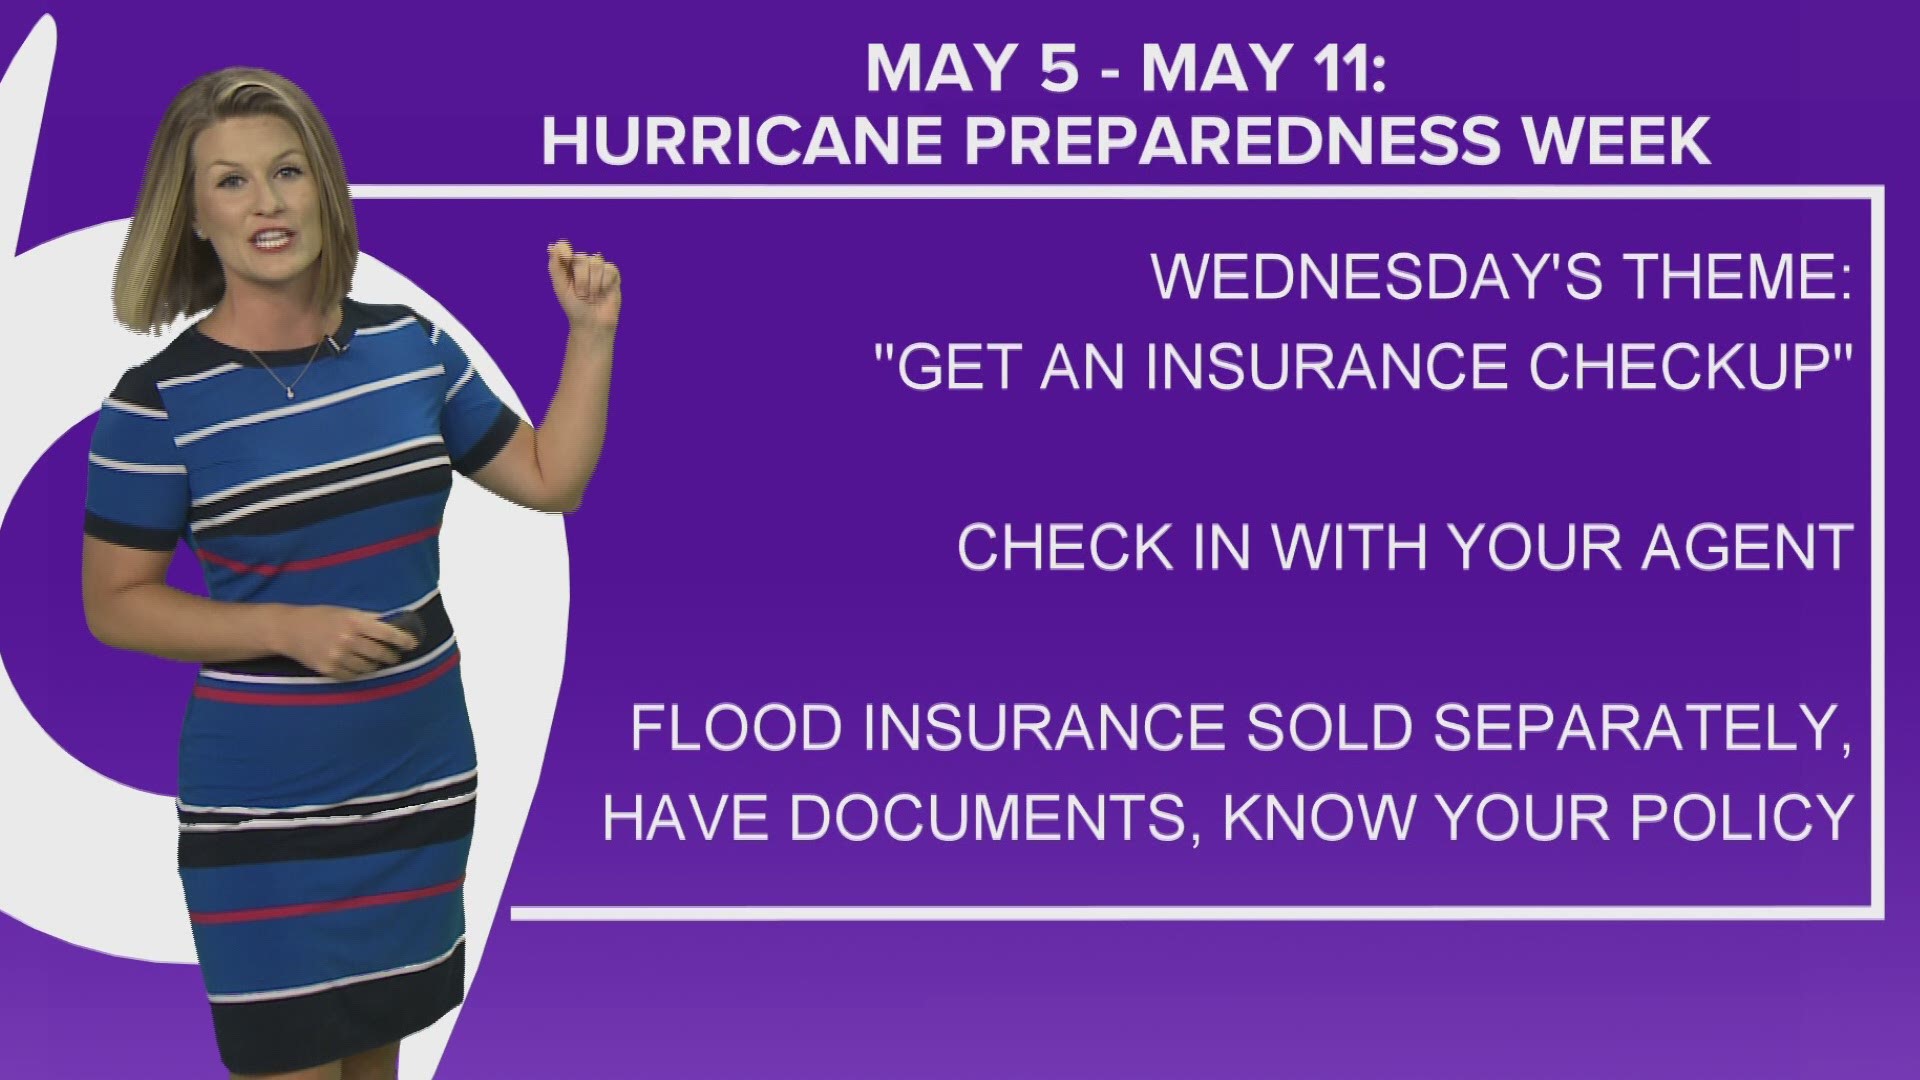 This Hurricane Preparedness Week, call your insurance company or agent and ask for an insurance checkup to make sure you have enough homeowners insurance to repair or even replace your home.